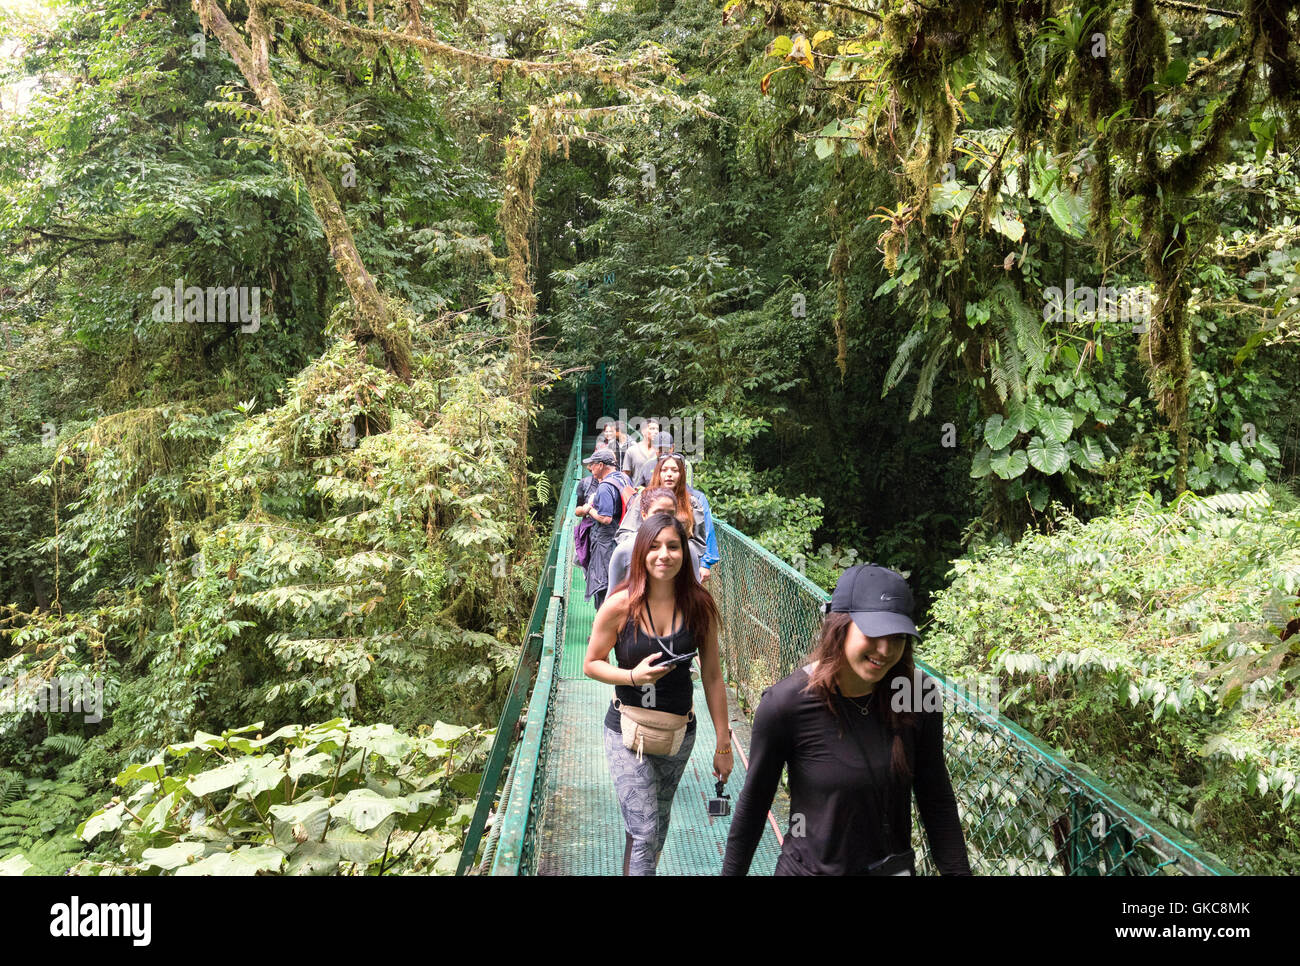 People on the Canopy bridges walk, Monteverde Cloud Forest reserve, Costa Rica Central America Stock Photo